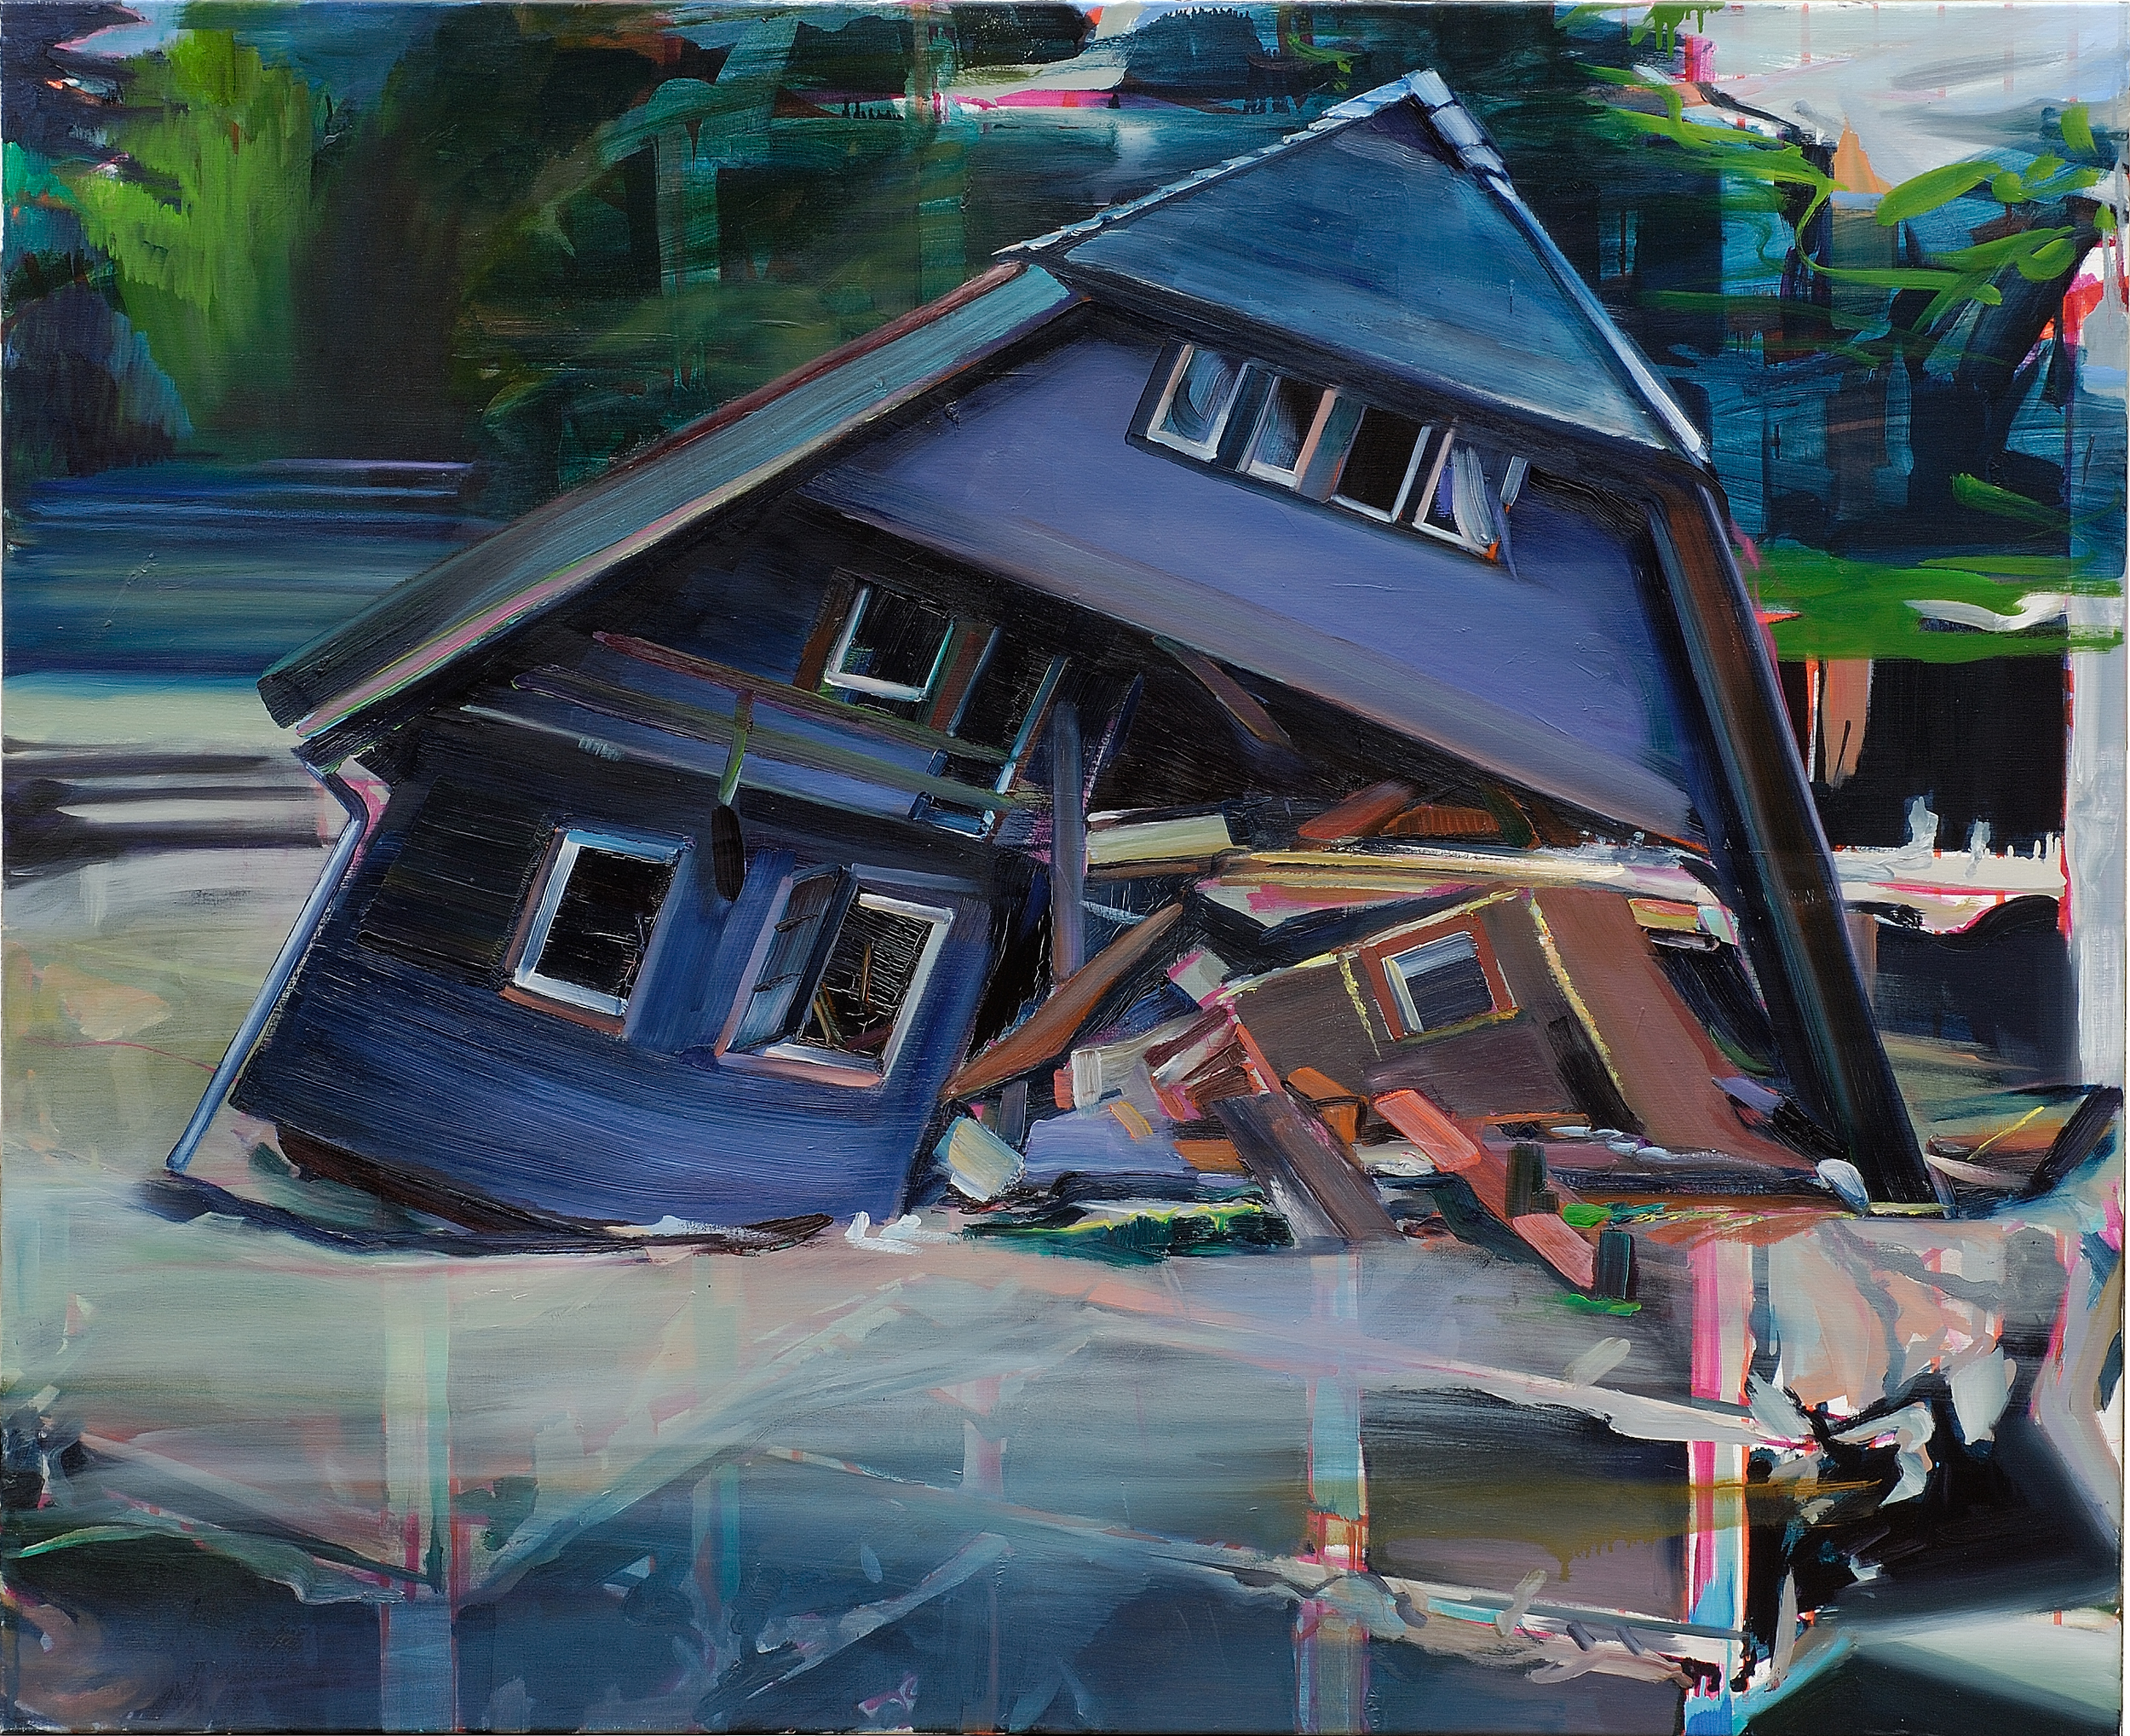   Night house , 2007, oil on canvas, 135 x 160cm. Private collection, France 